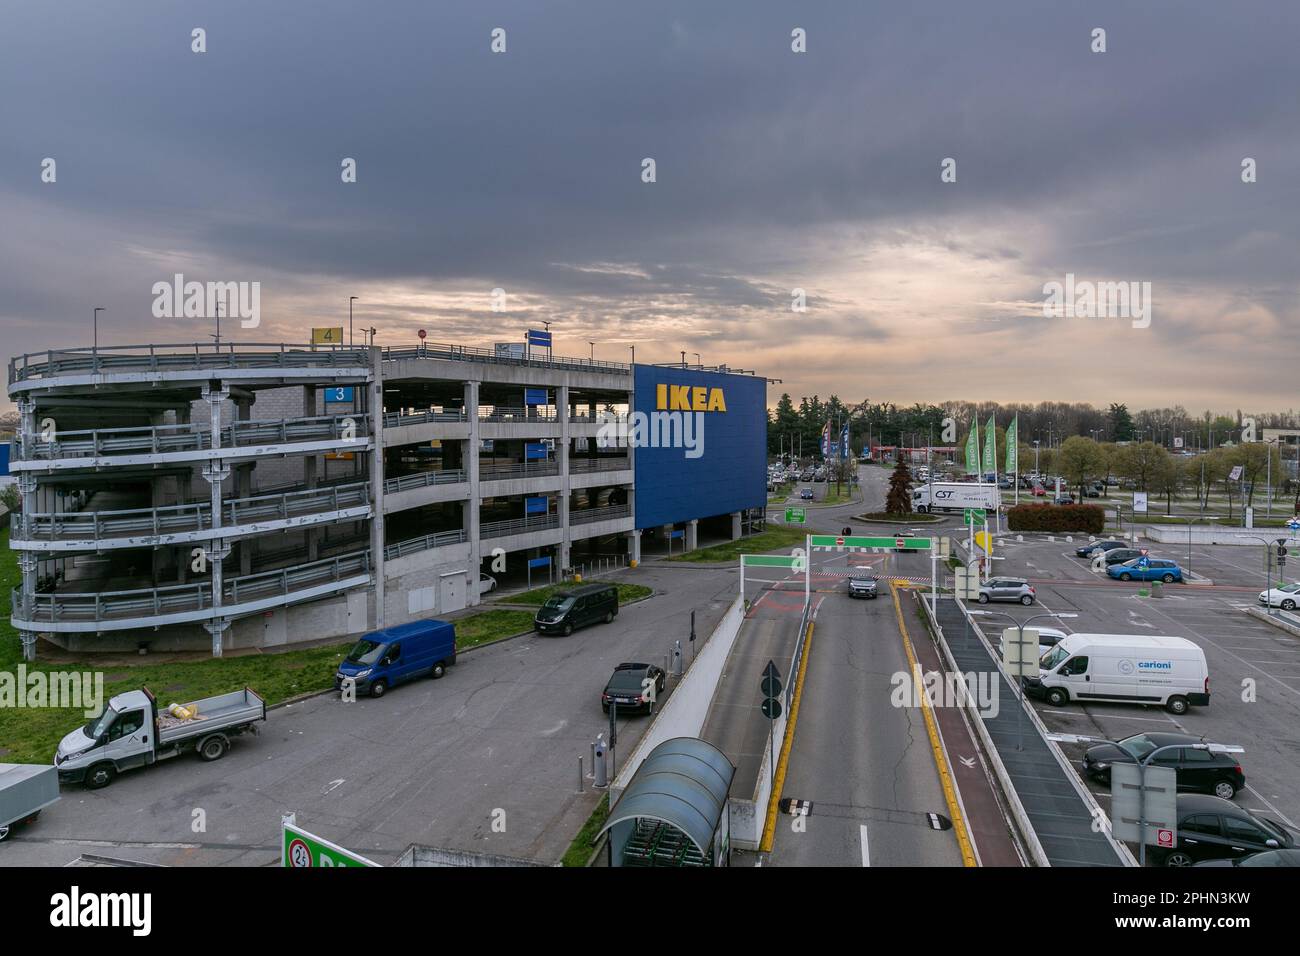 Carugate, Italy - march 2023 - panoramic view of Ikea store Stock Photo